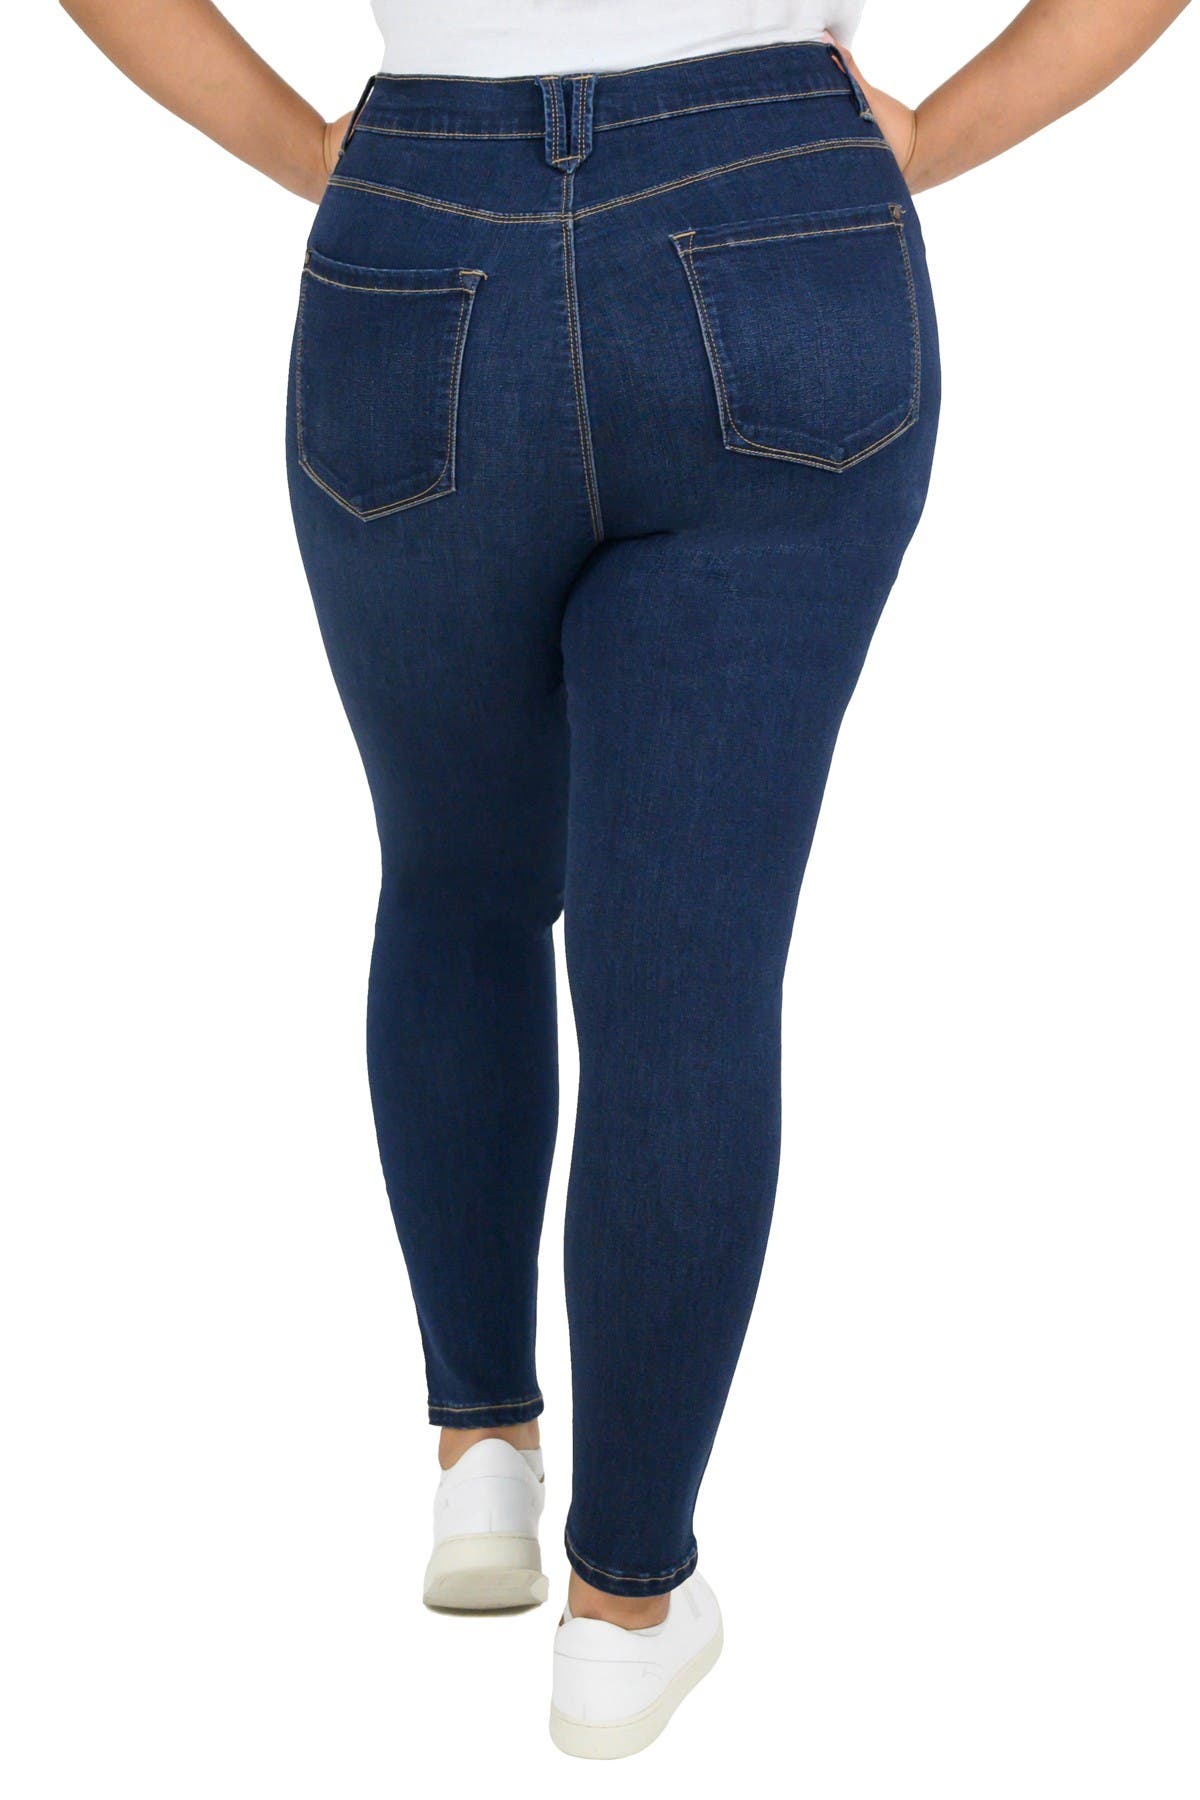 curve appeal jeans canada